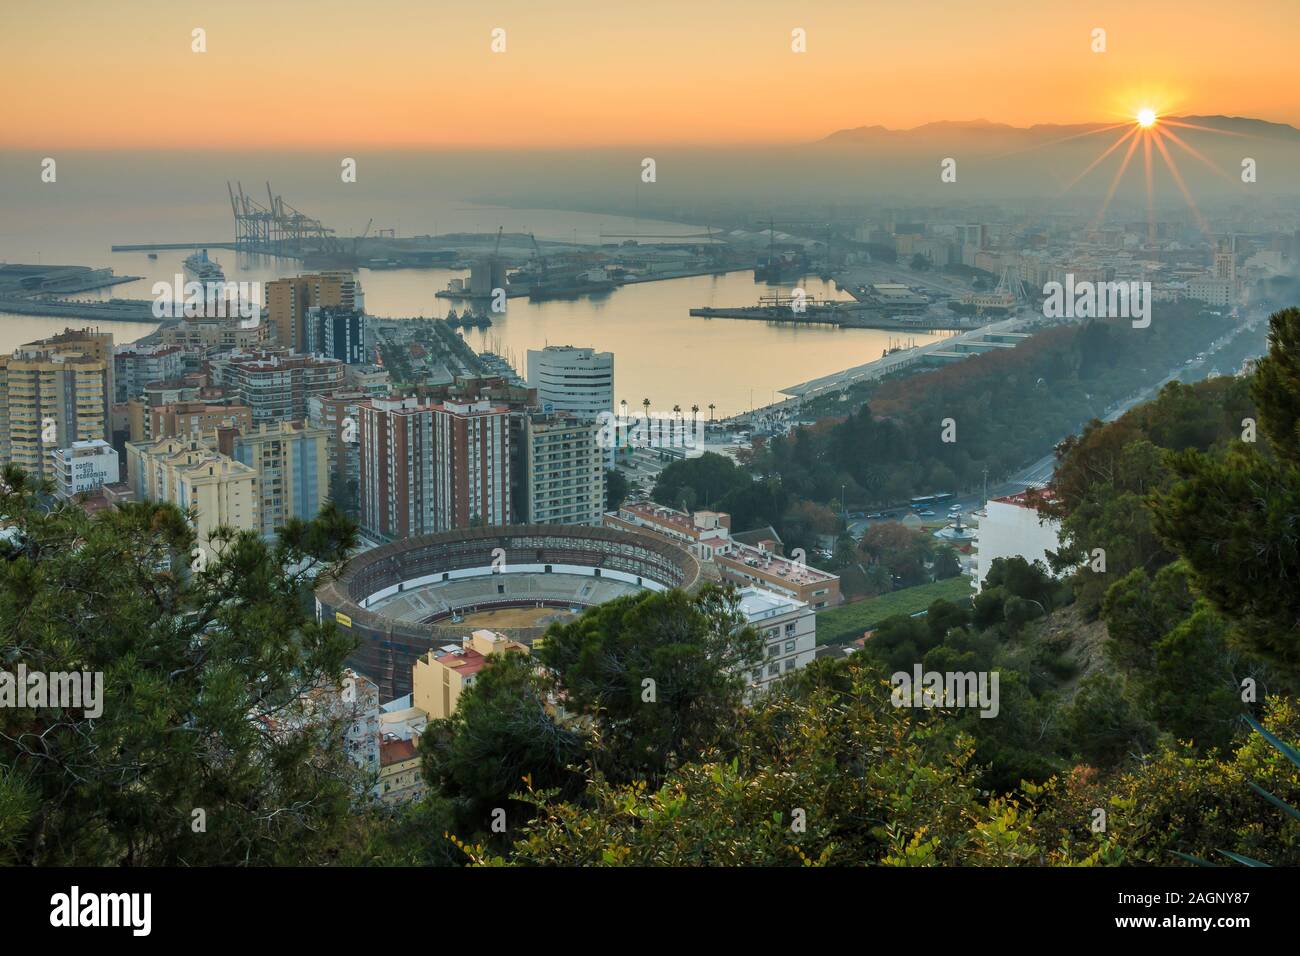 Sunset over Malaga on the Spanish Costa del Sol with a panoramic view of the city, the harbor, the houses, the trees, the bullring with street light Stock Photo